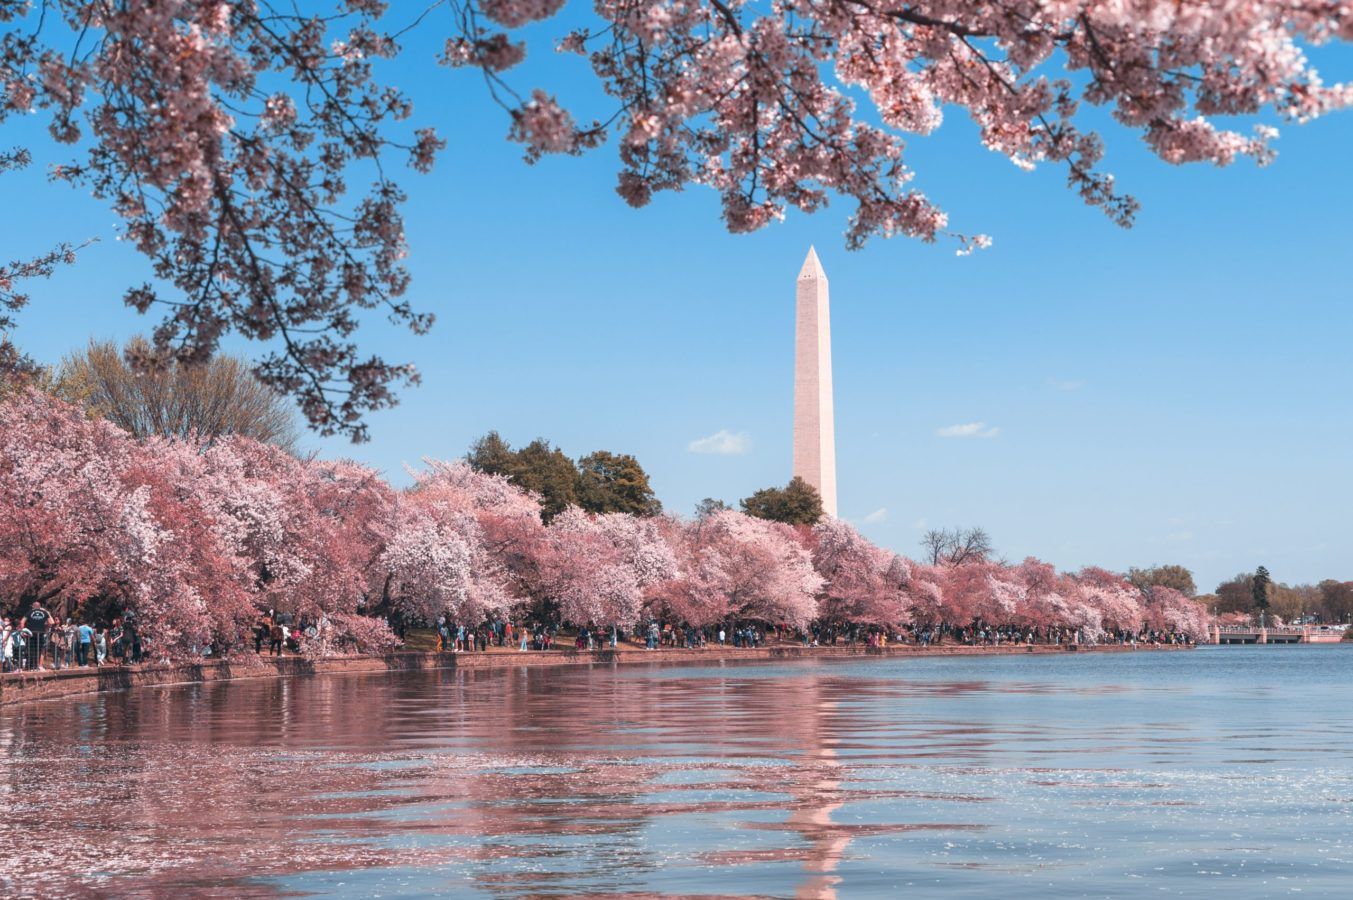 Where to see the most stunning cherry blossoms in the world, besides Japan